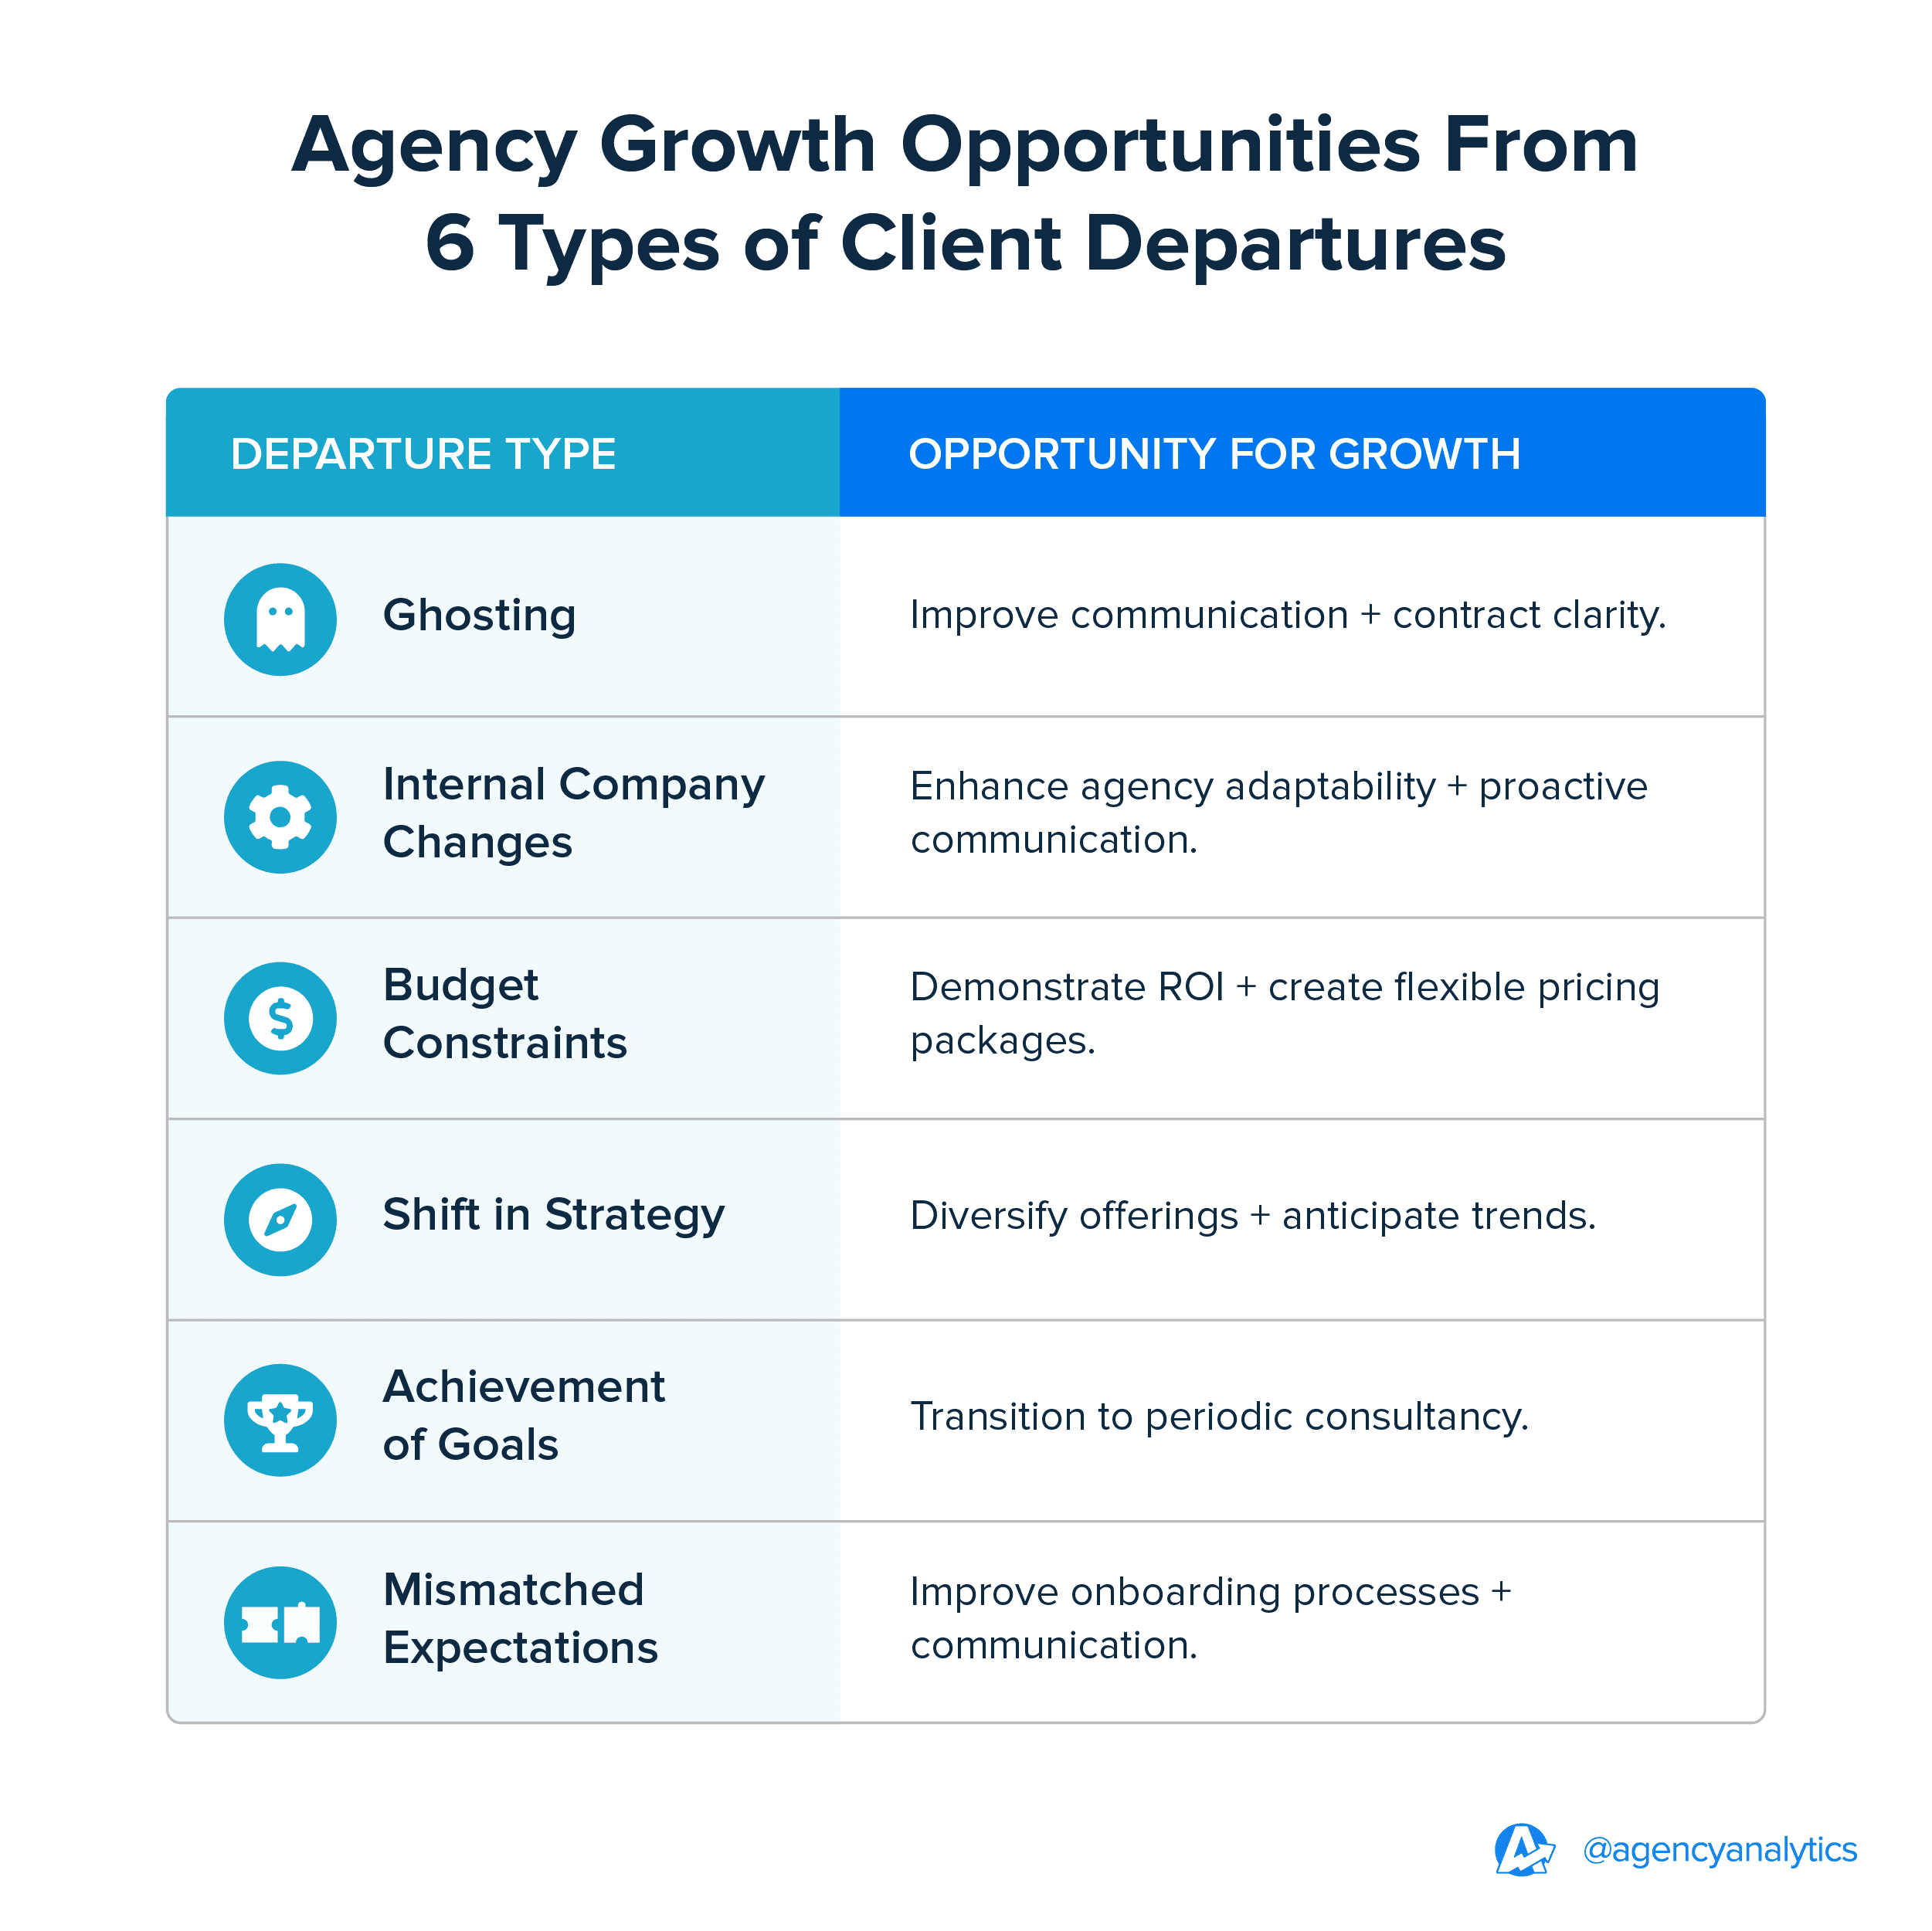 Agency Growth Opportunities From 6 Types of Client Departures